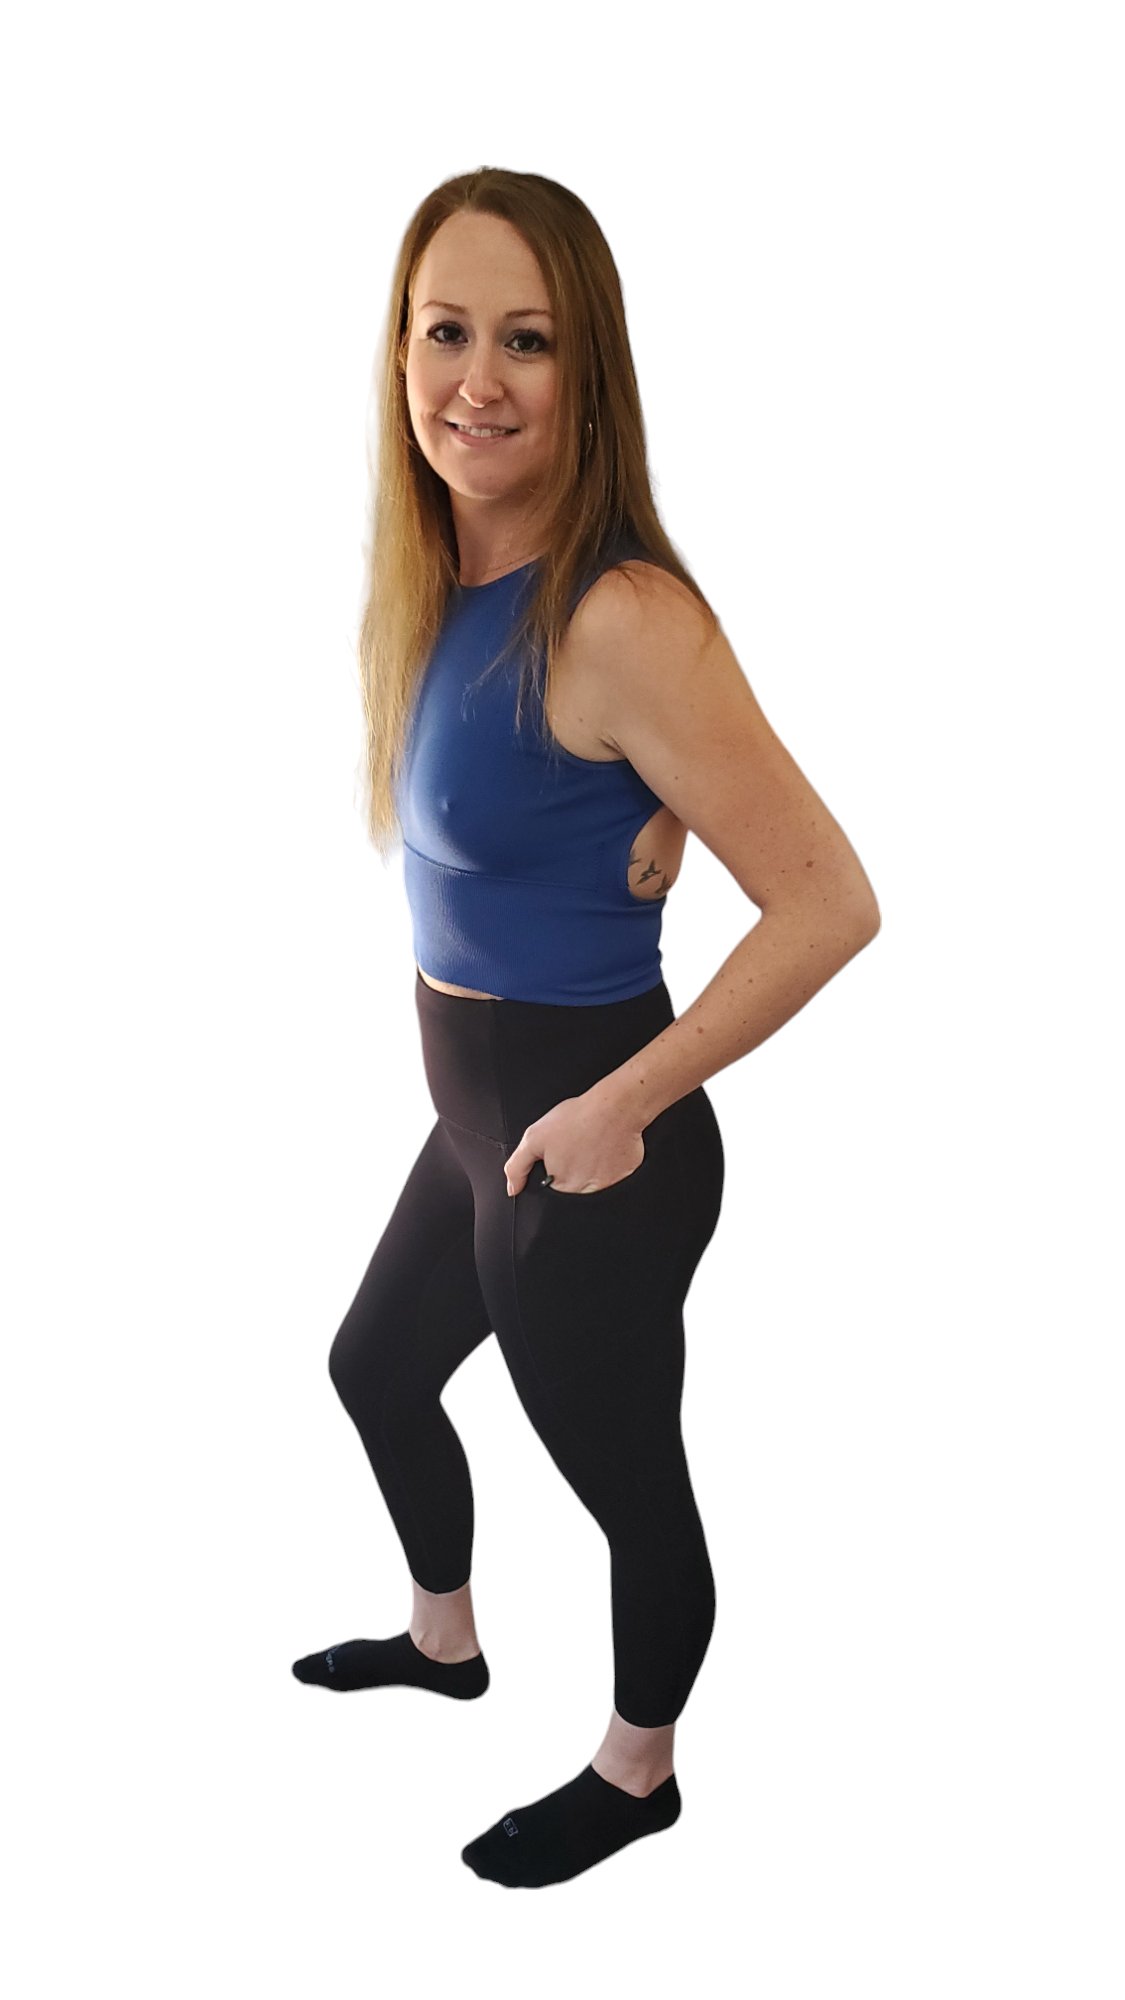 High Waisted Tummy Control Shaping Leggings with Pockets that have